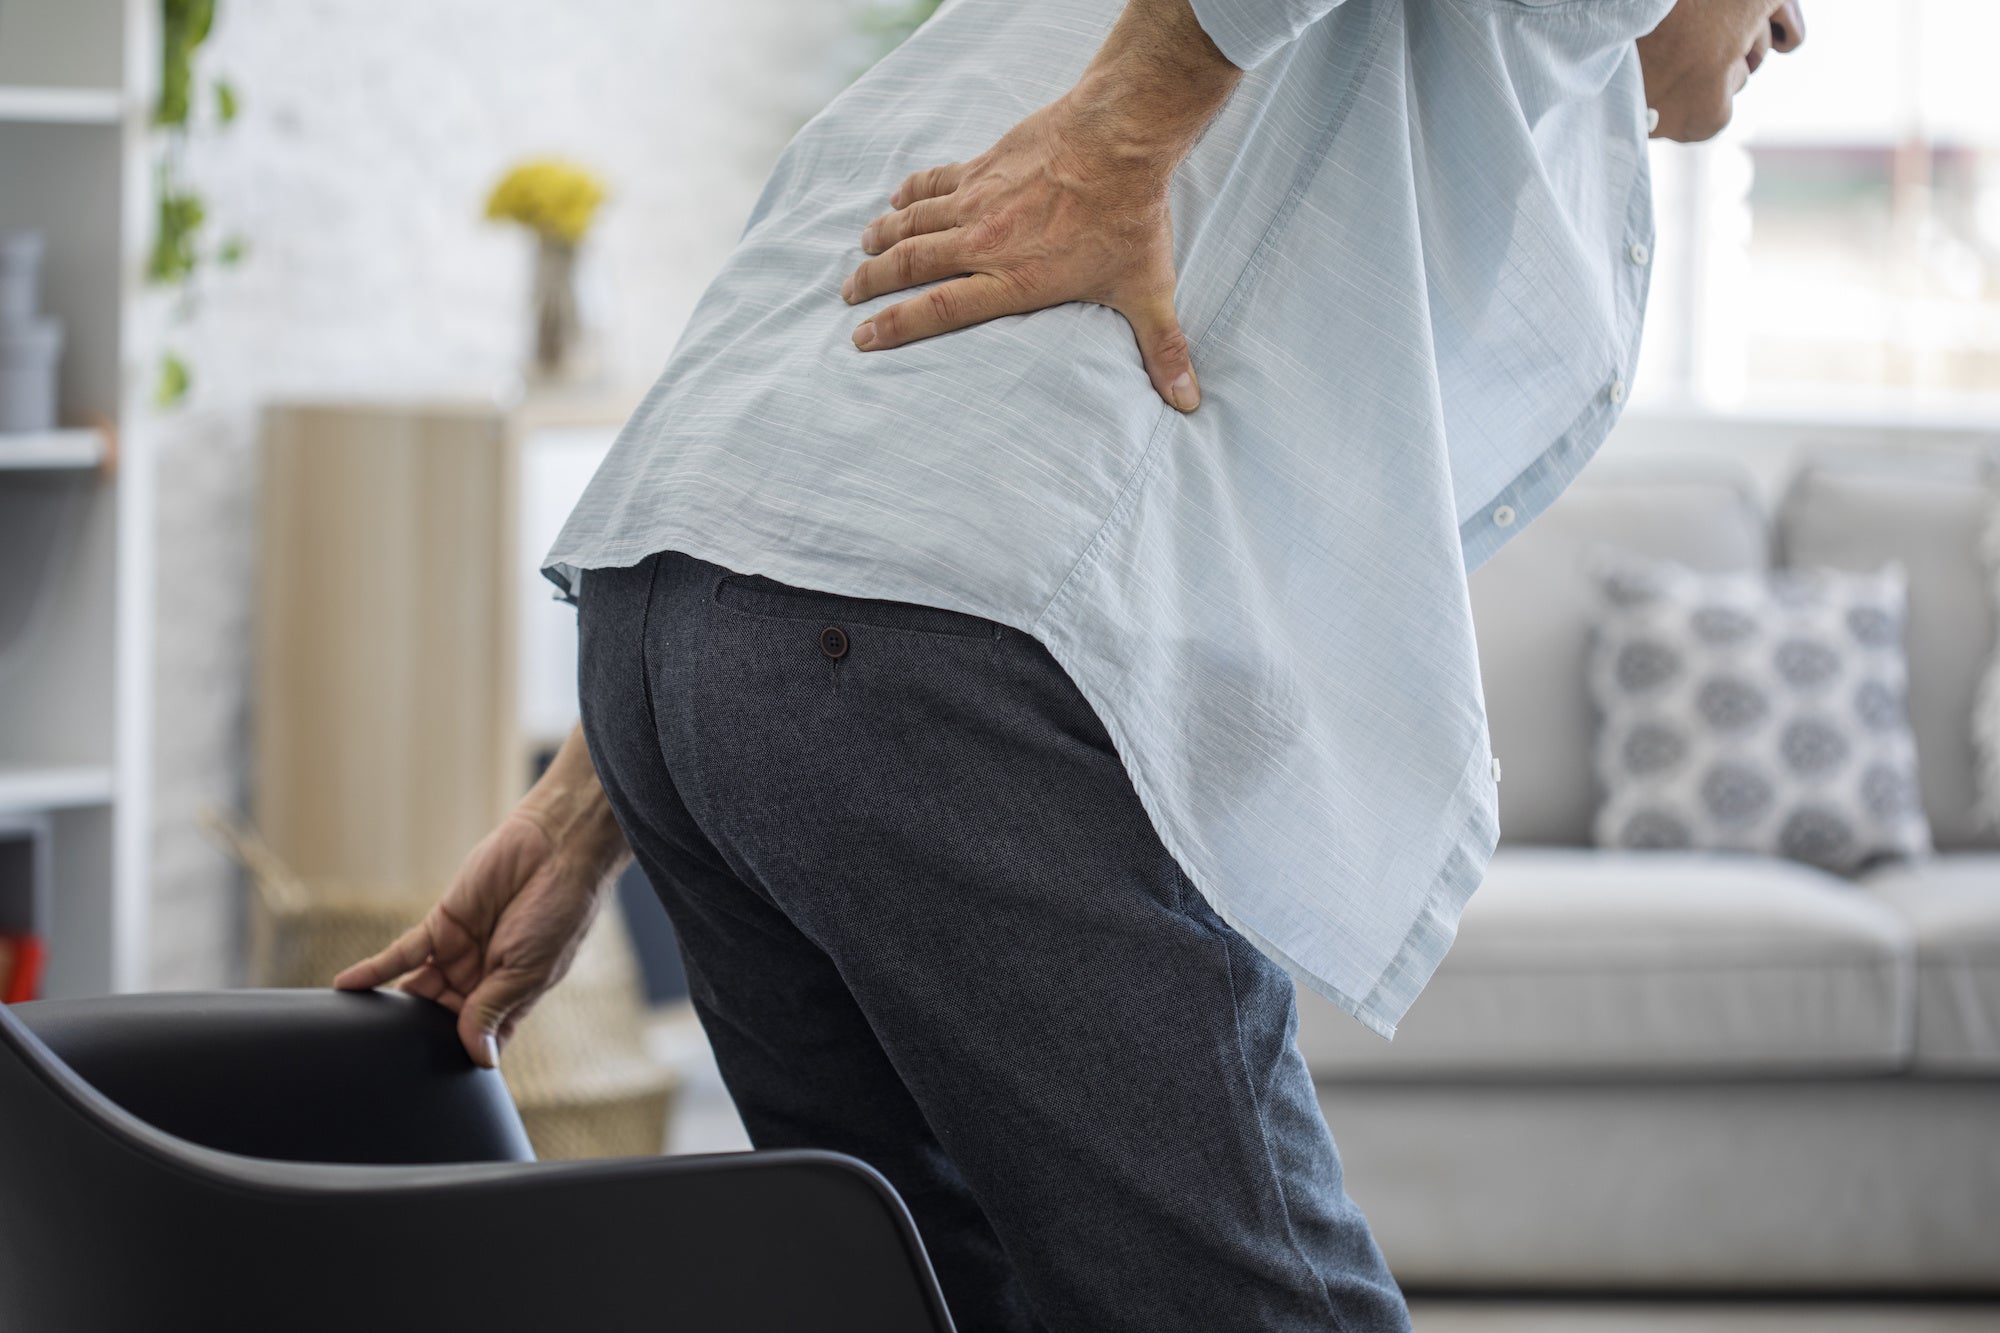 Warning: What Everybody Ought to Know about Spondylolisthesis